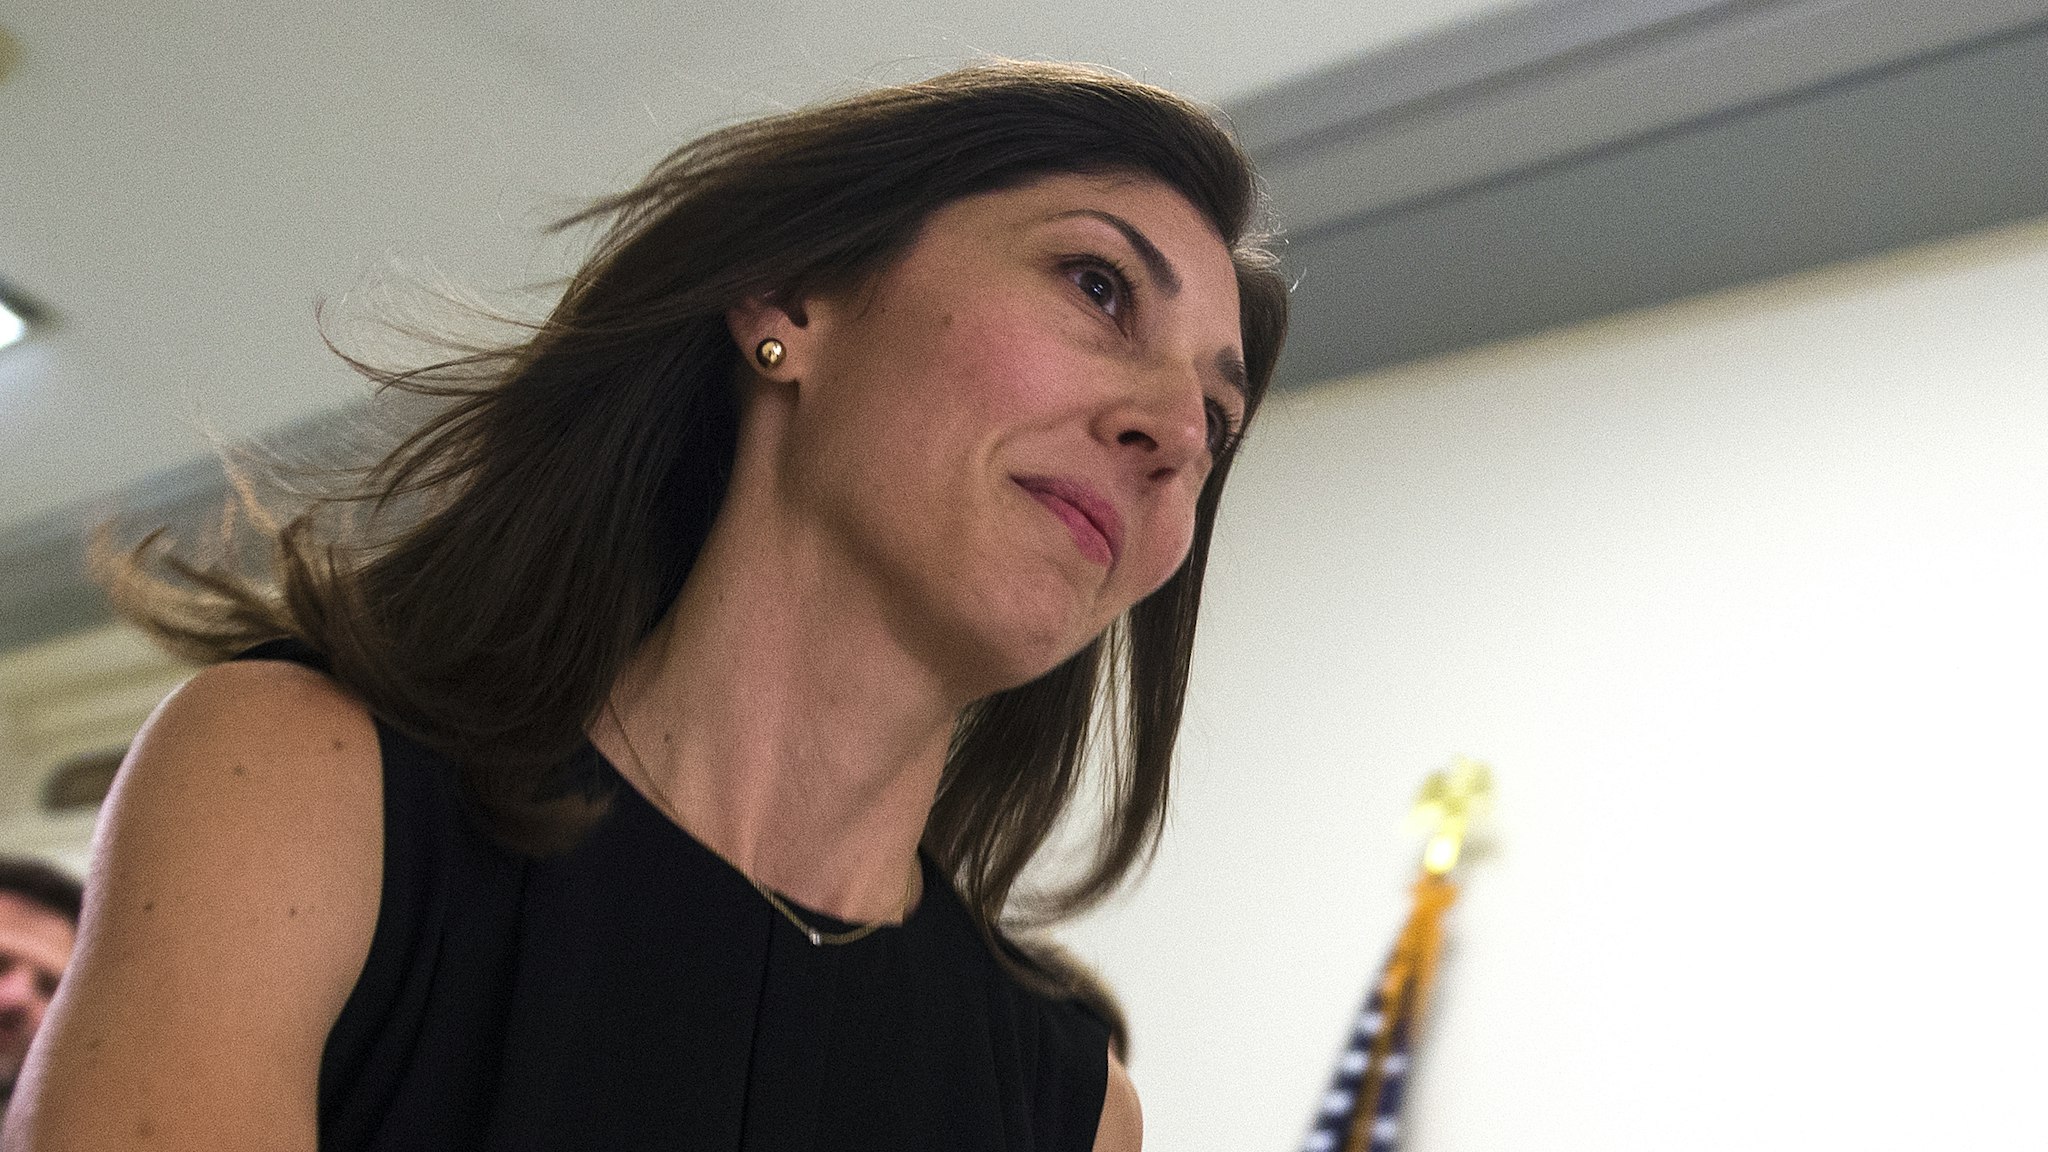 Lisa Page, former legal counsel to former FBI Director Andrew Mc Cabe, arrives on Capitol Hill July 13, 2018 to provide closed-door testimony about the texts critical of Donald Trump that she exchanged with her FBI agent lover during the 2016 presidential campaign.